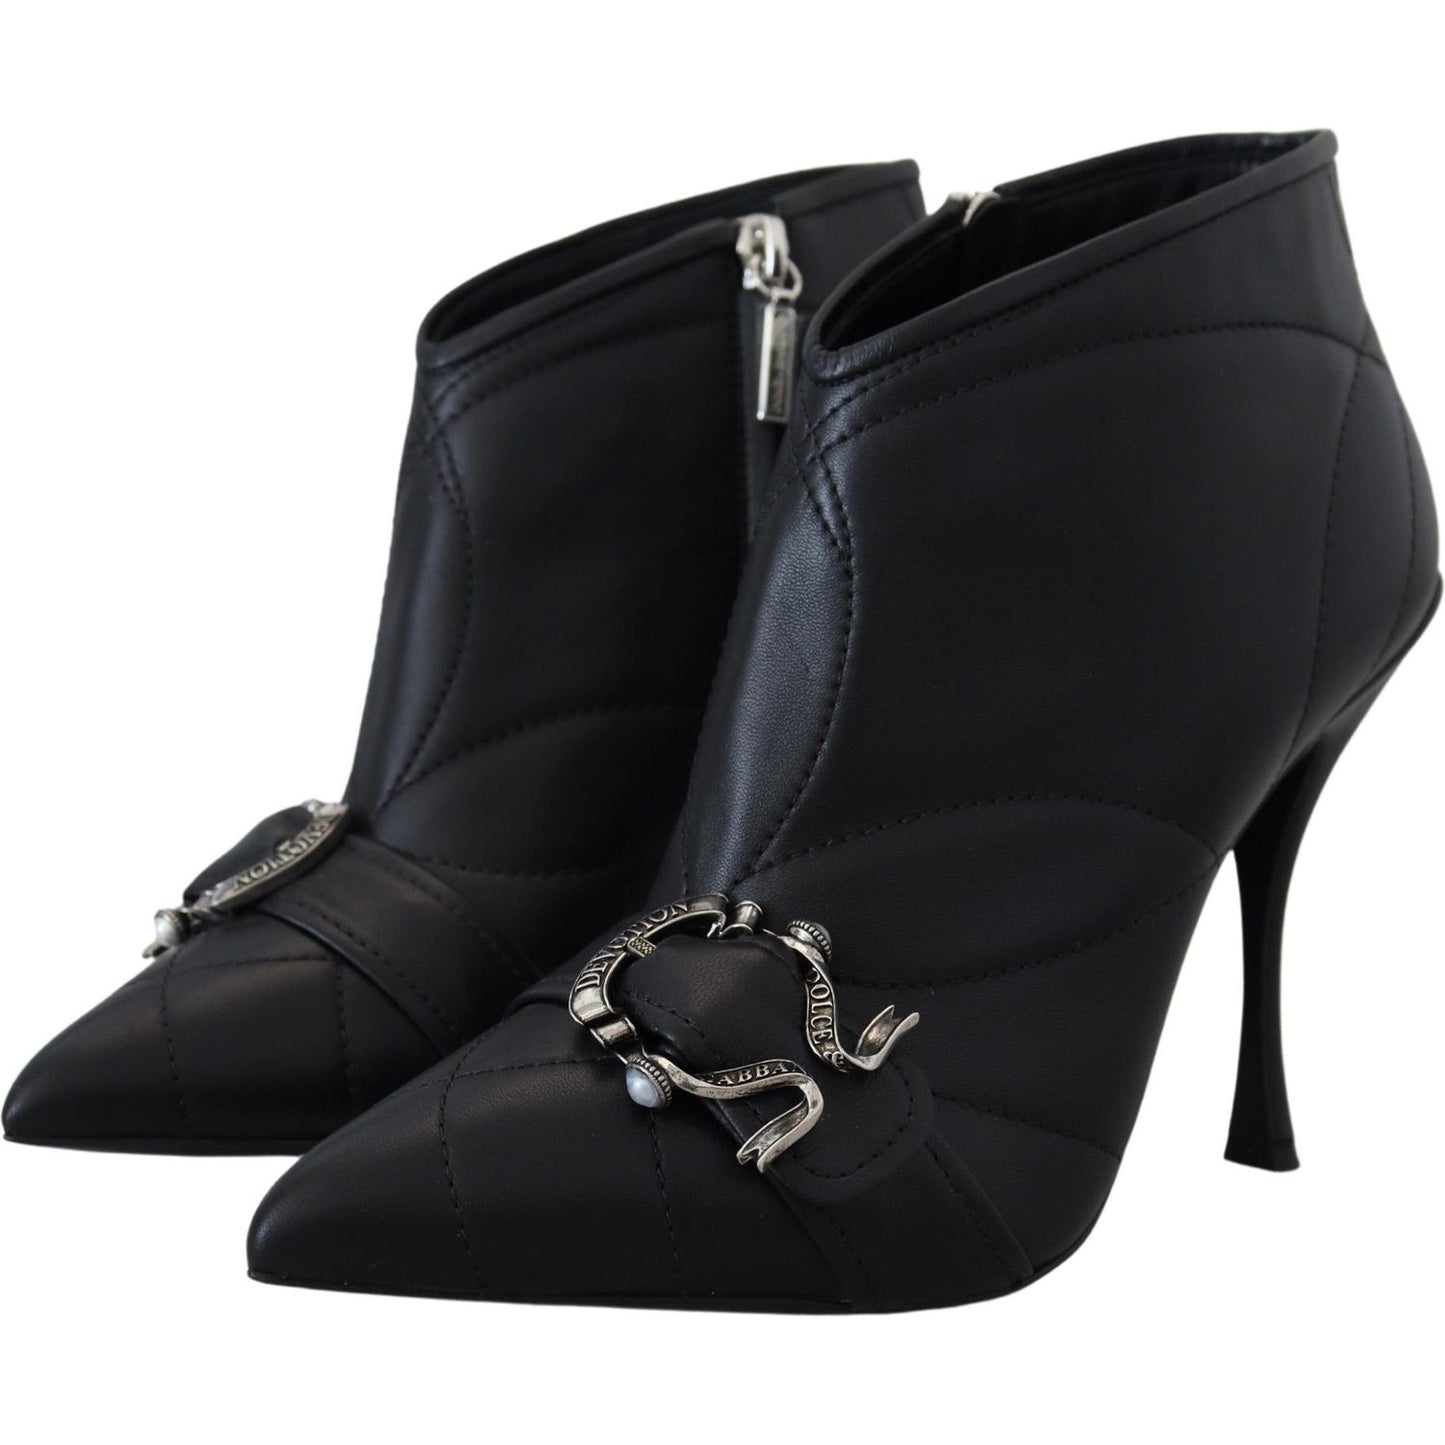 Dolce & Gabbana Elegant Black Quilted Leather Booties black-devotion-quilted-buckled-ankle-boots-shoes